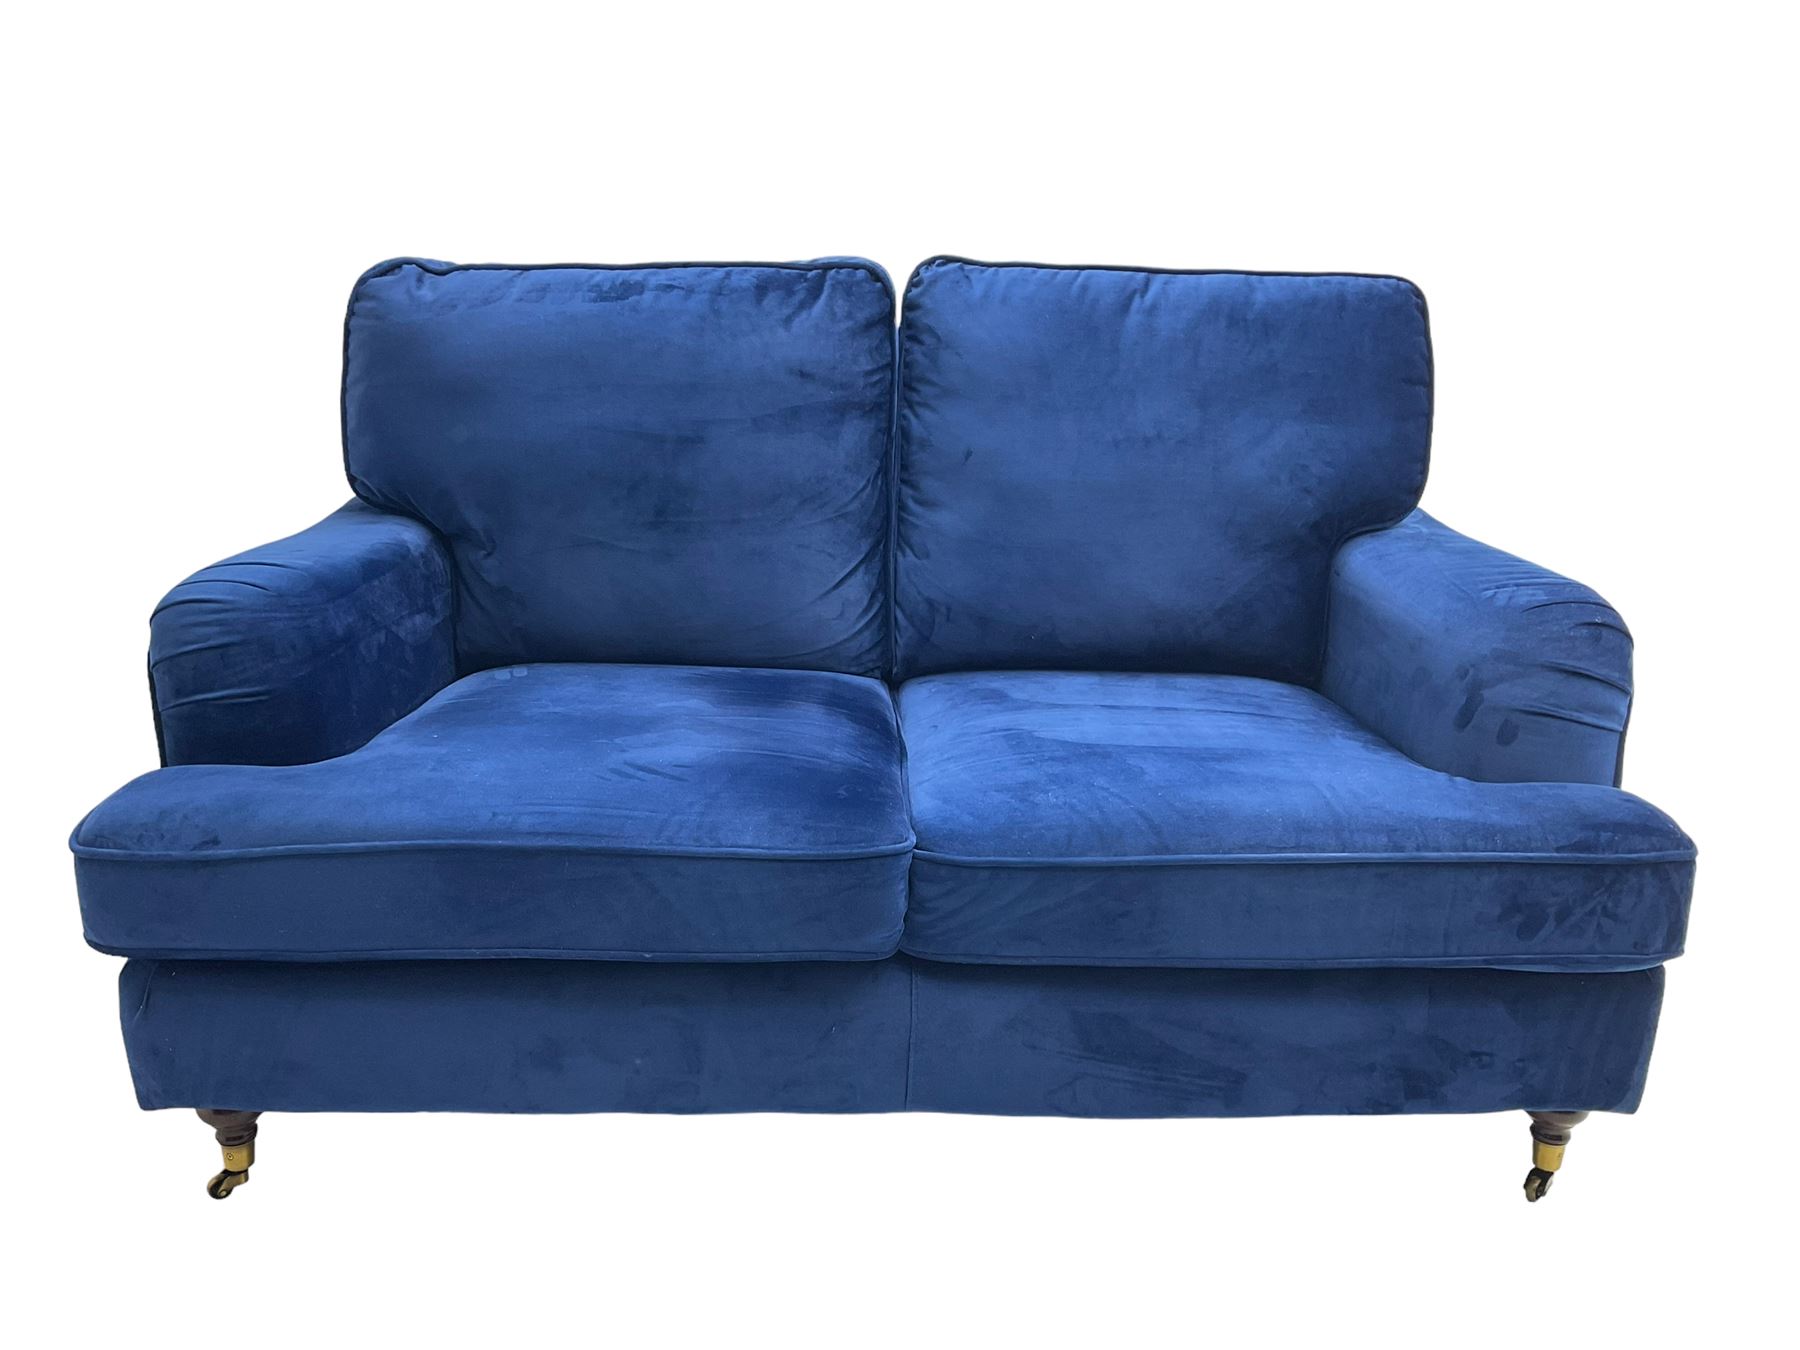 Howard Design Two Seat Sofa Upholstered In Blue Fabric Traditional Shape With Rolled Arms On Walnut Finish Turned Feet Brushed Metal Cups And Castors The Furnishings Furniture Interiors